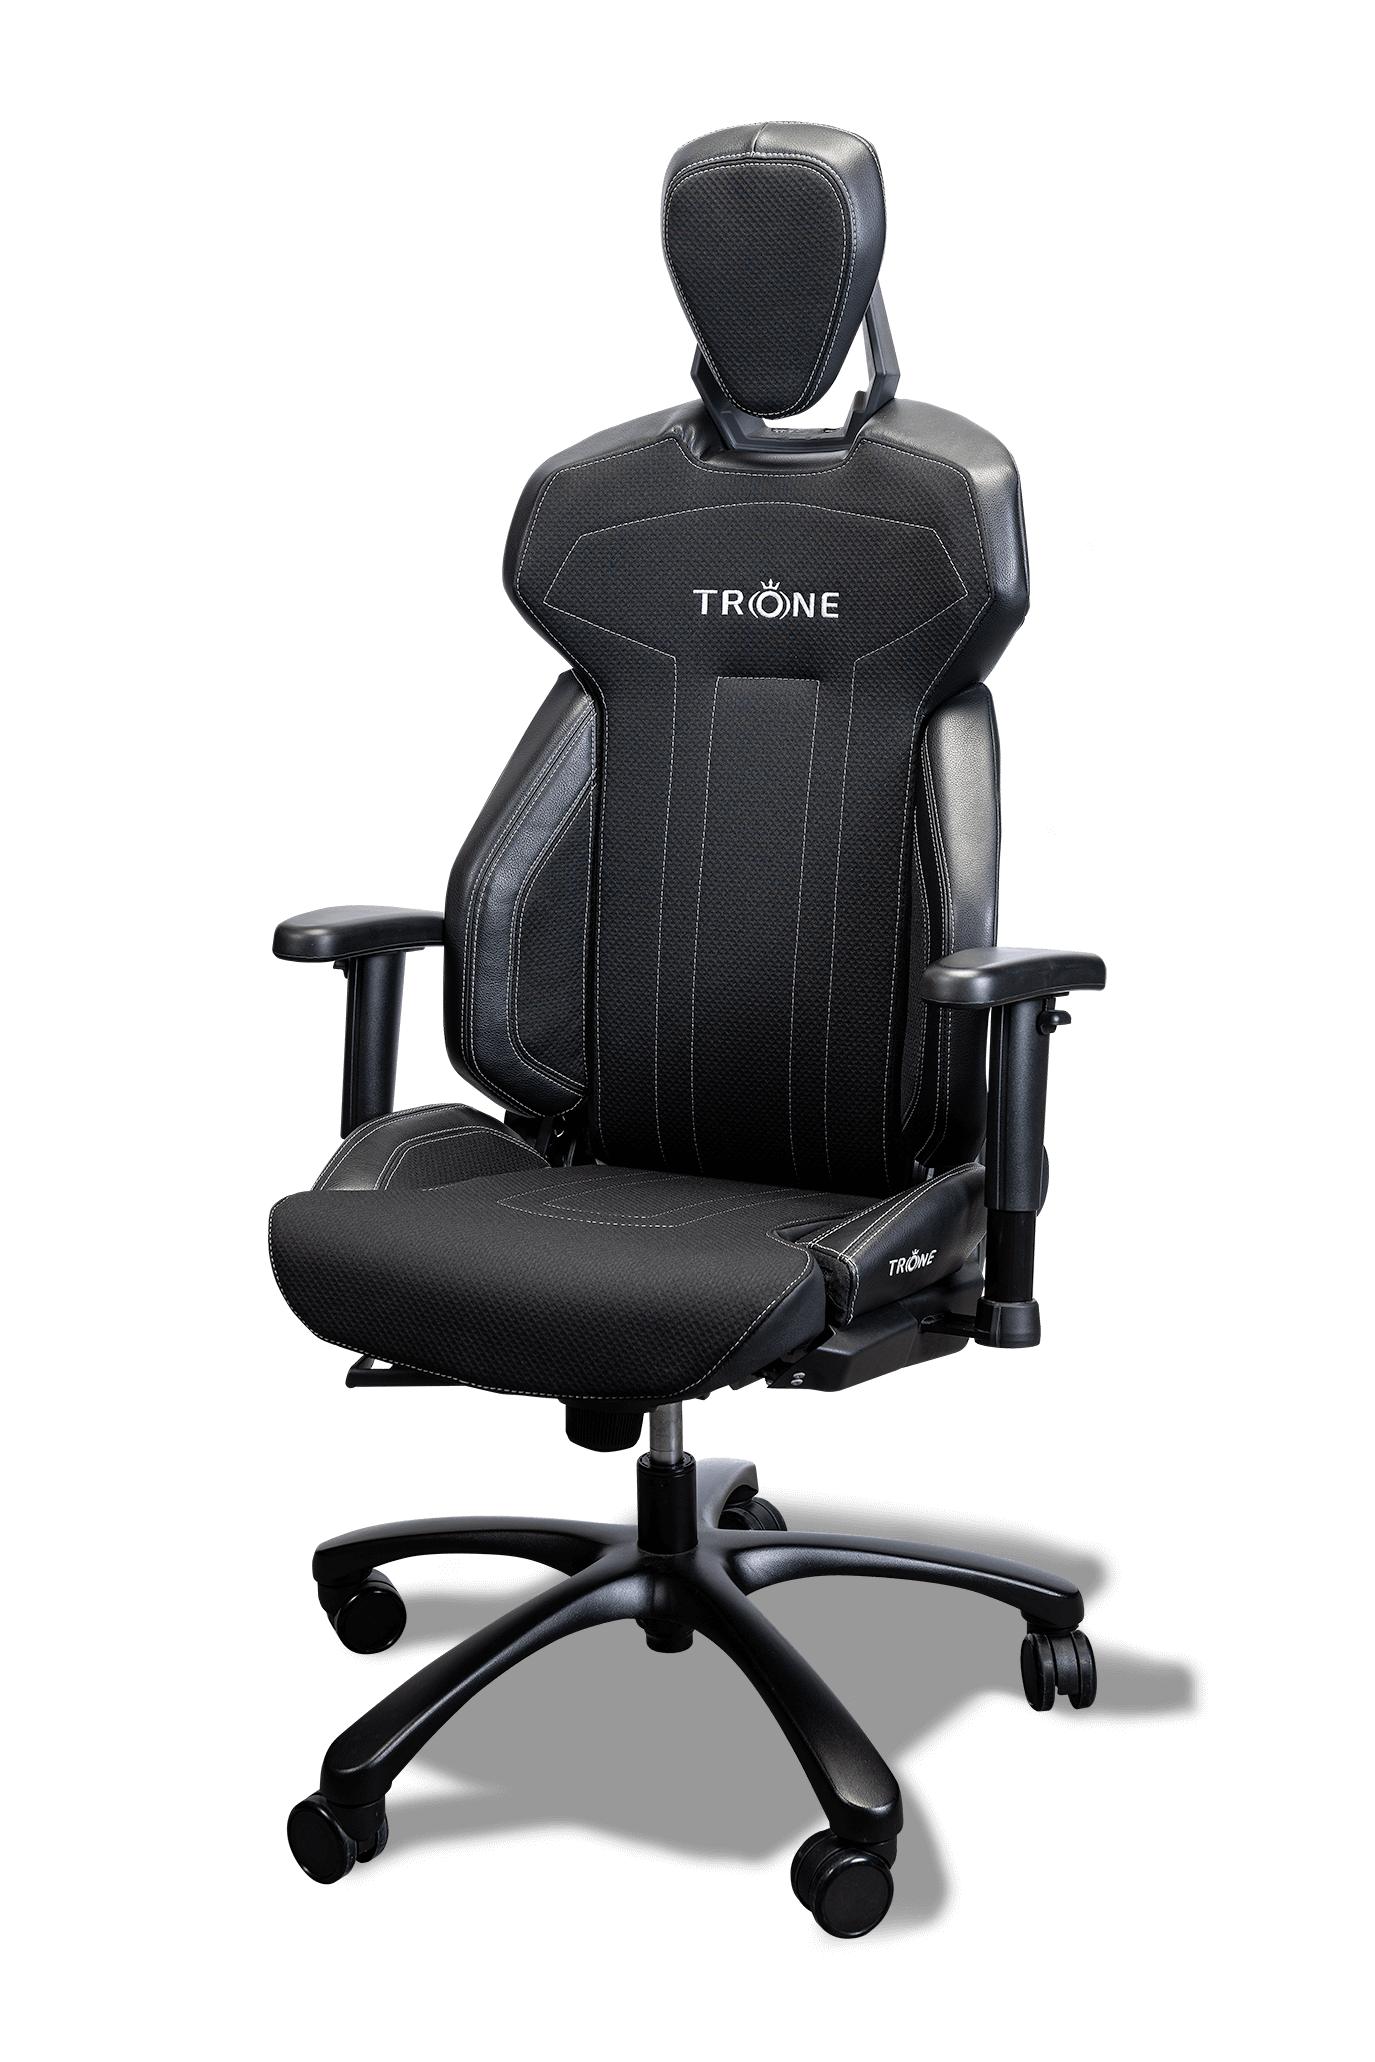 trone-high-back-office-basic-product